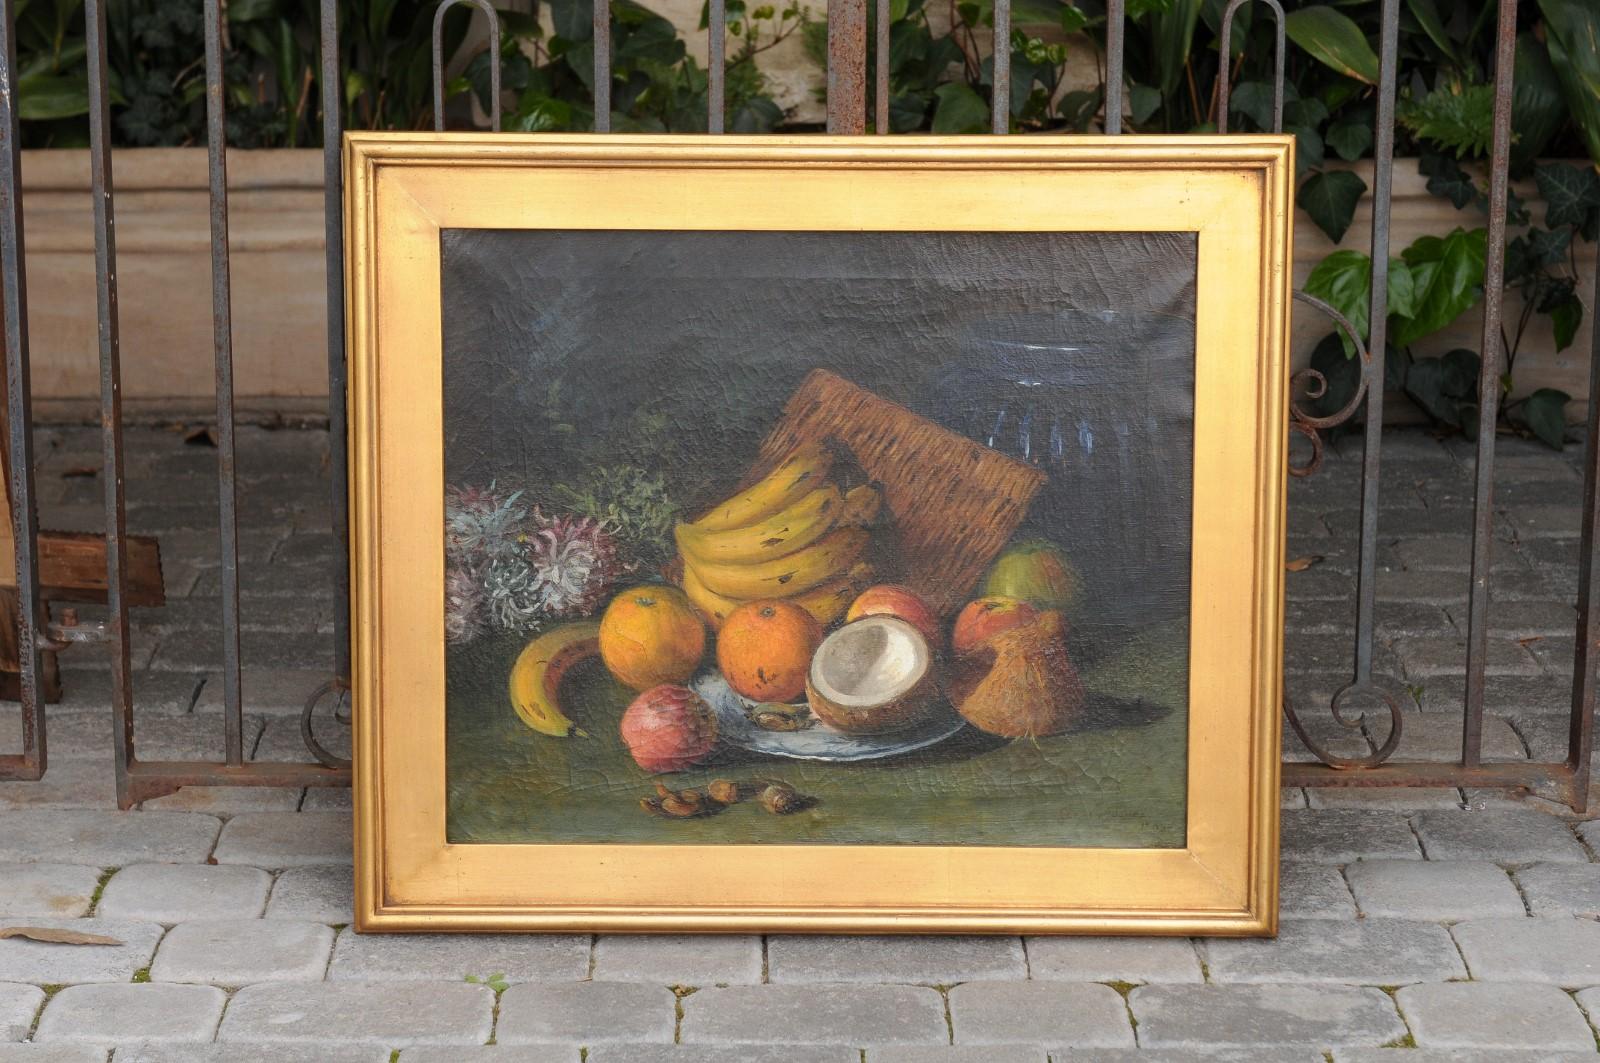 An English oil on canvas still-life painting from the early 20th century, by Elinor Jones and set inside a giltwood frame. Born in the first decade of the 20th century, this lovely still-life painting depicts an arrangement of fruits painted on a